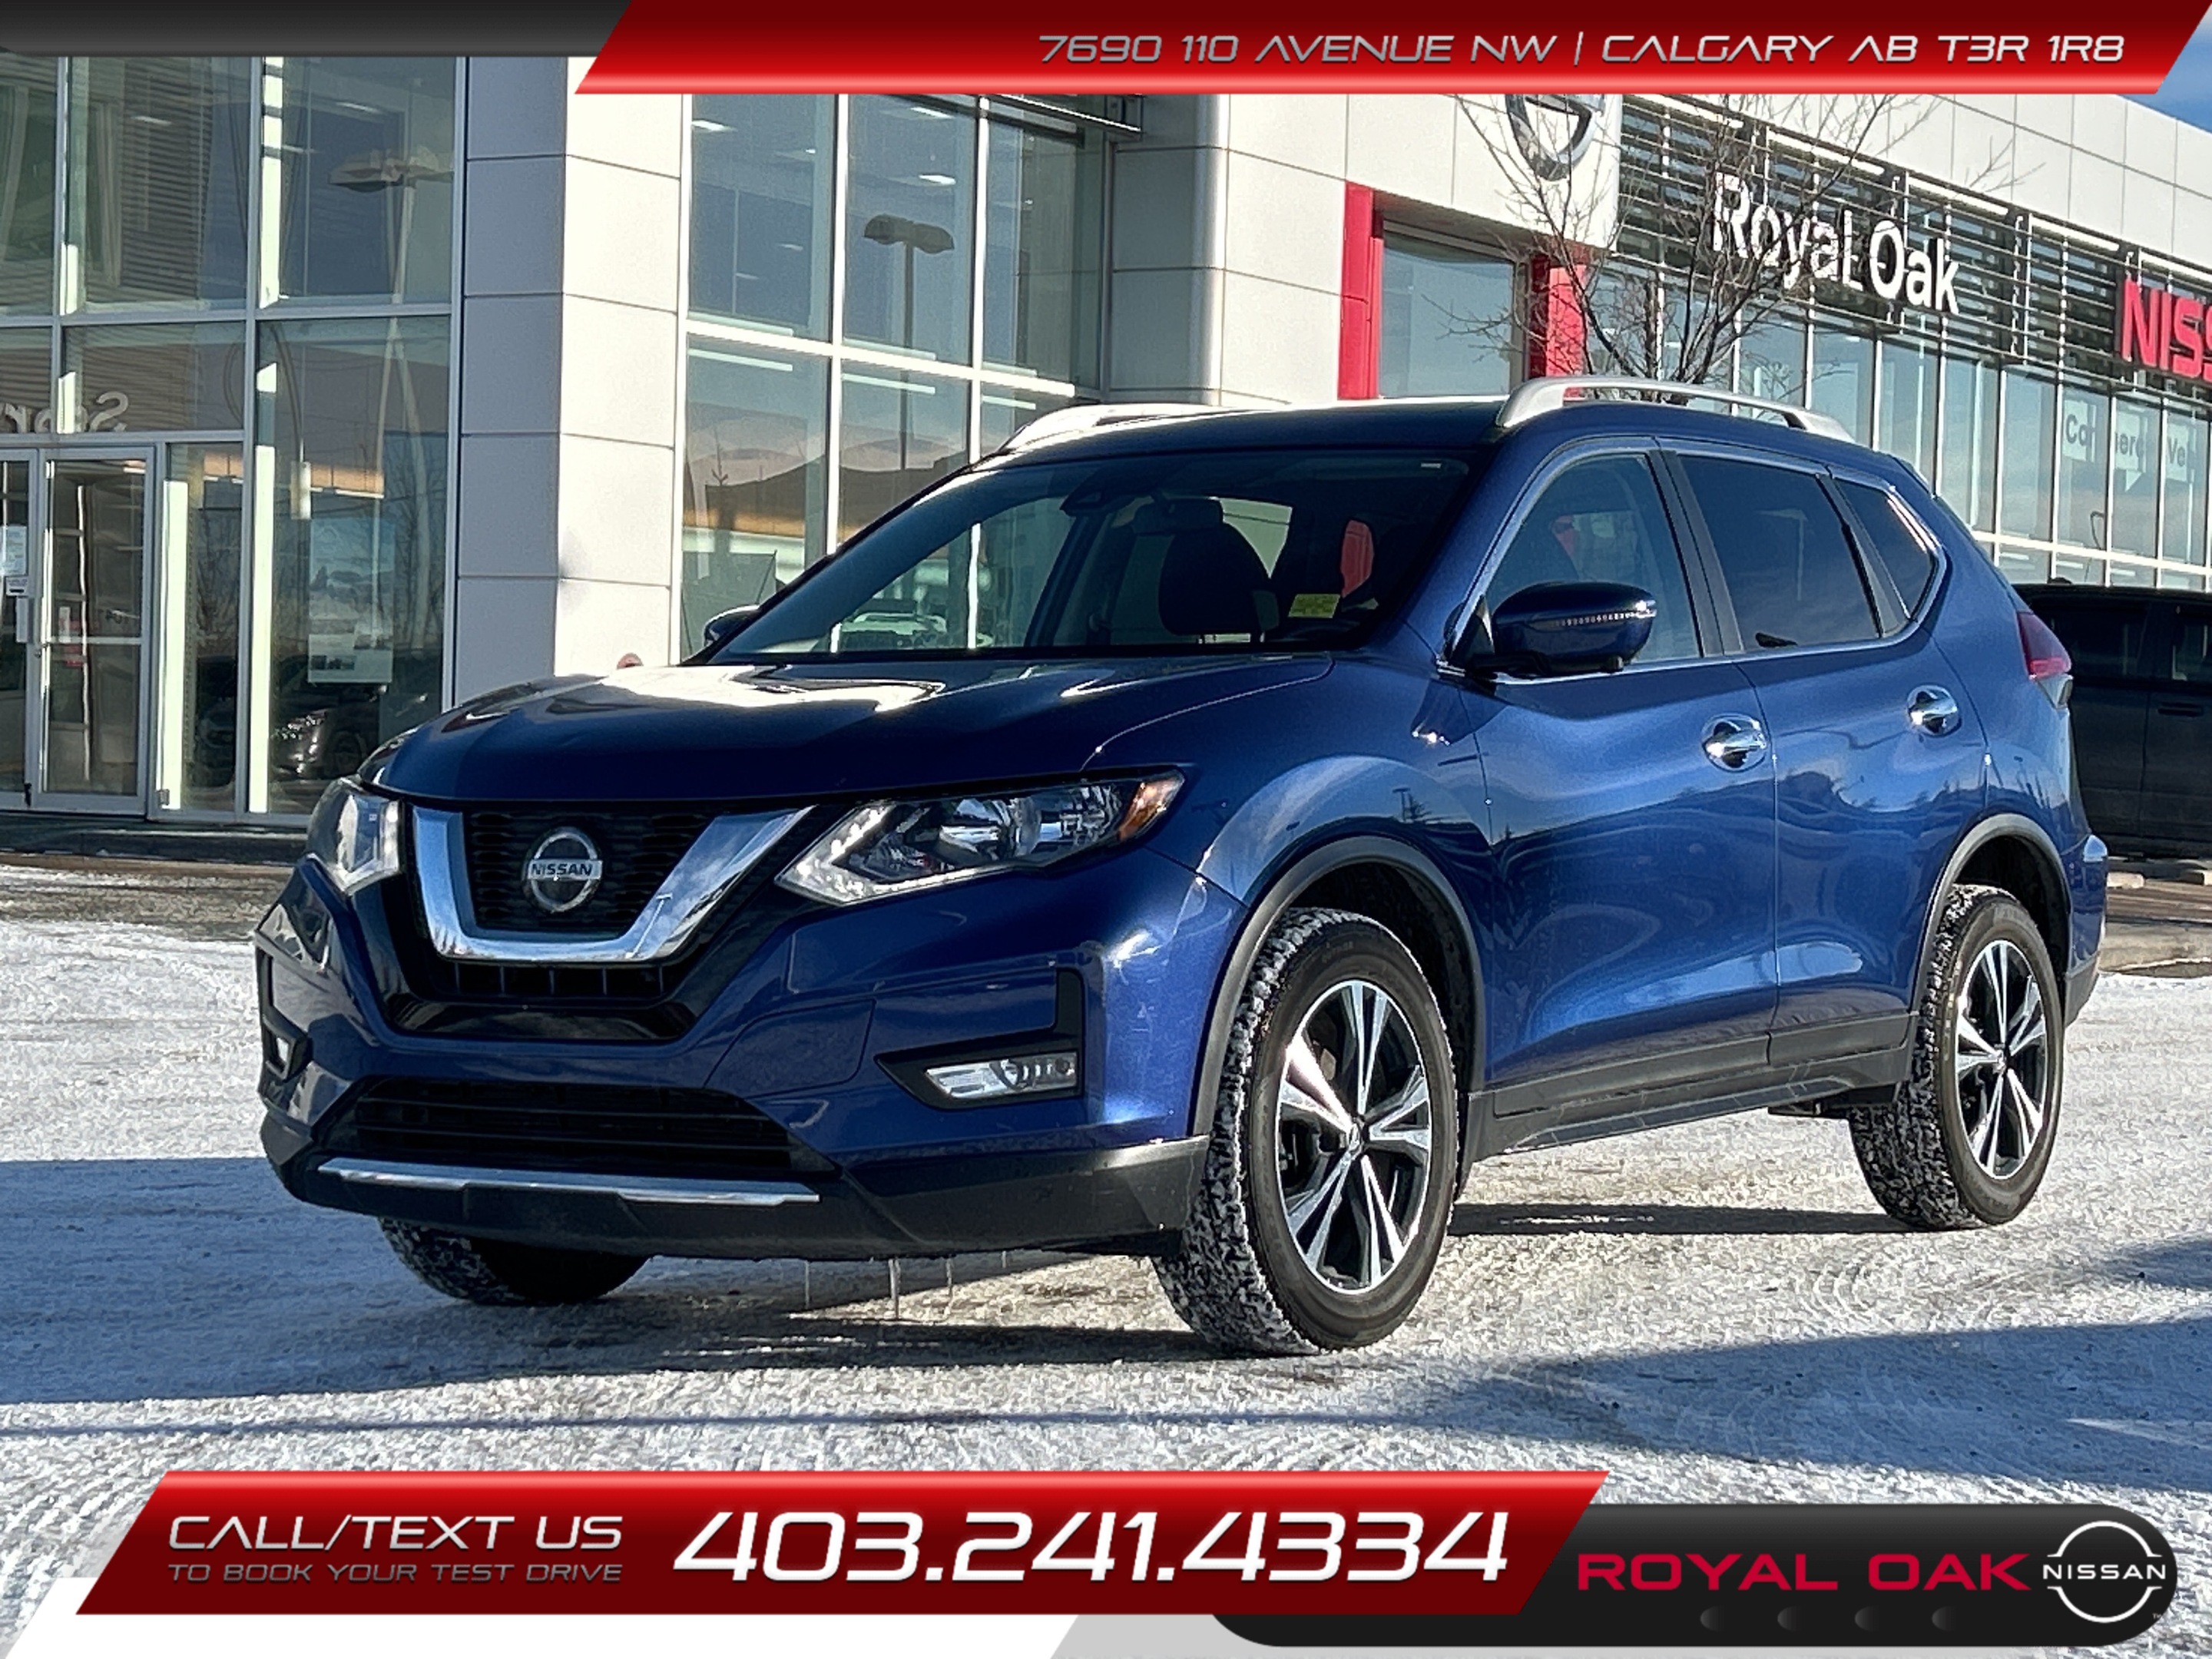 2020 Nissan Rogue AWD SV - Certified Pre-Owned Vehicle (CPO)